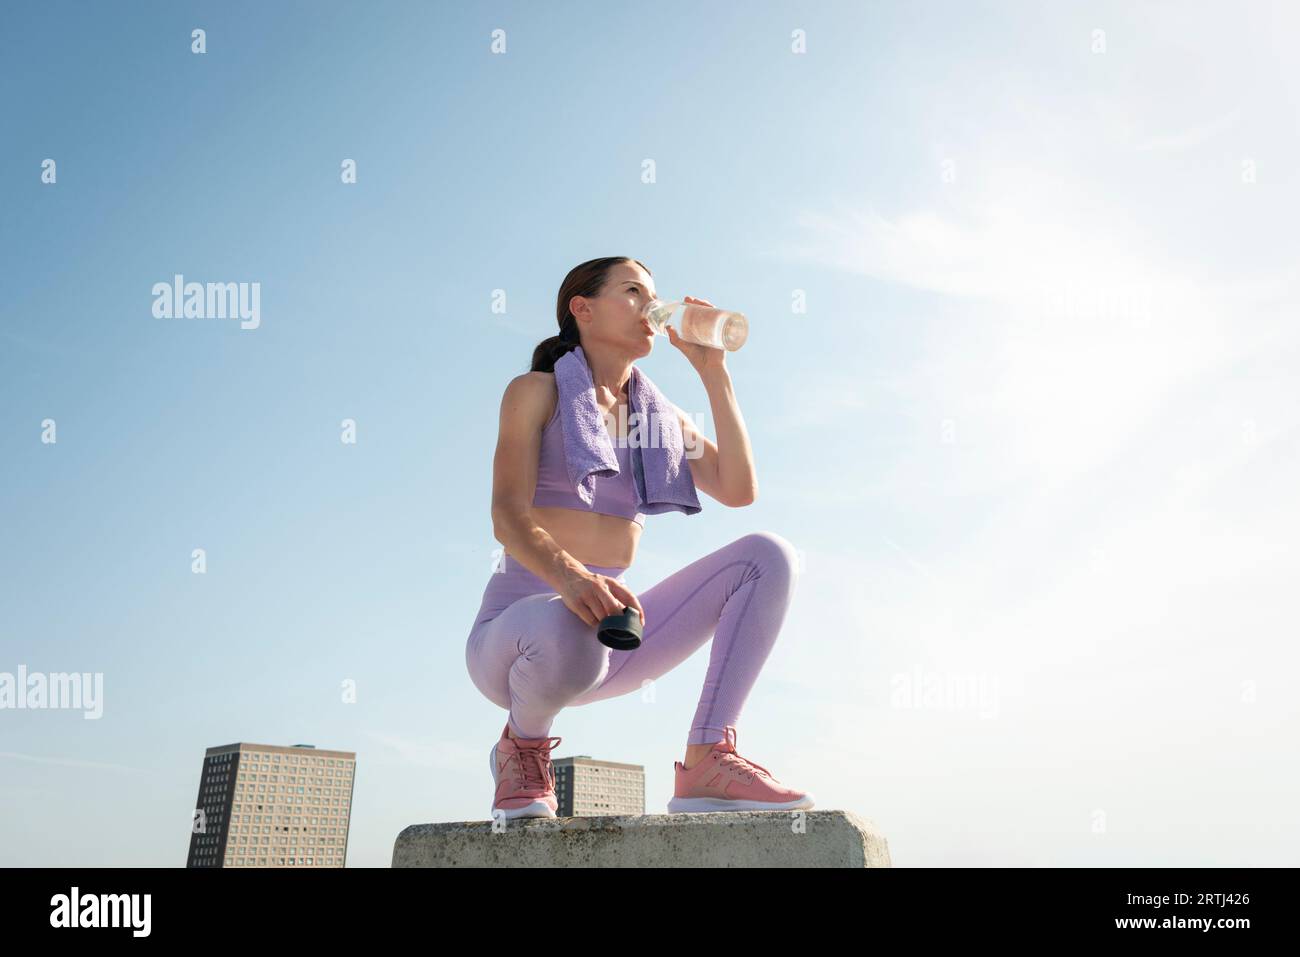 Sporty mid adult woman taking a drink of water from a glass bottle after exercise. Urban background Stock Photo